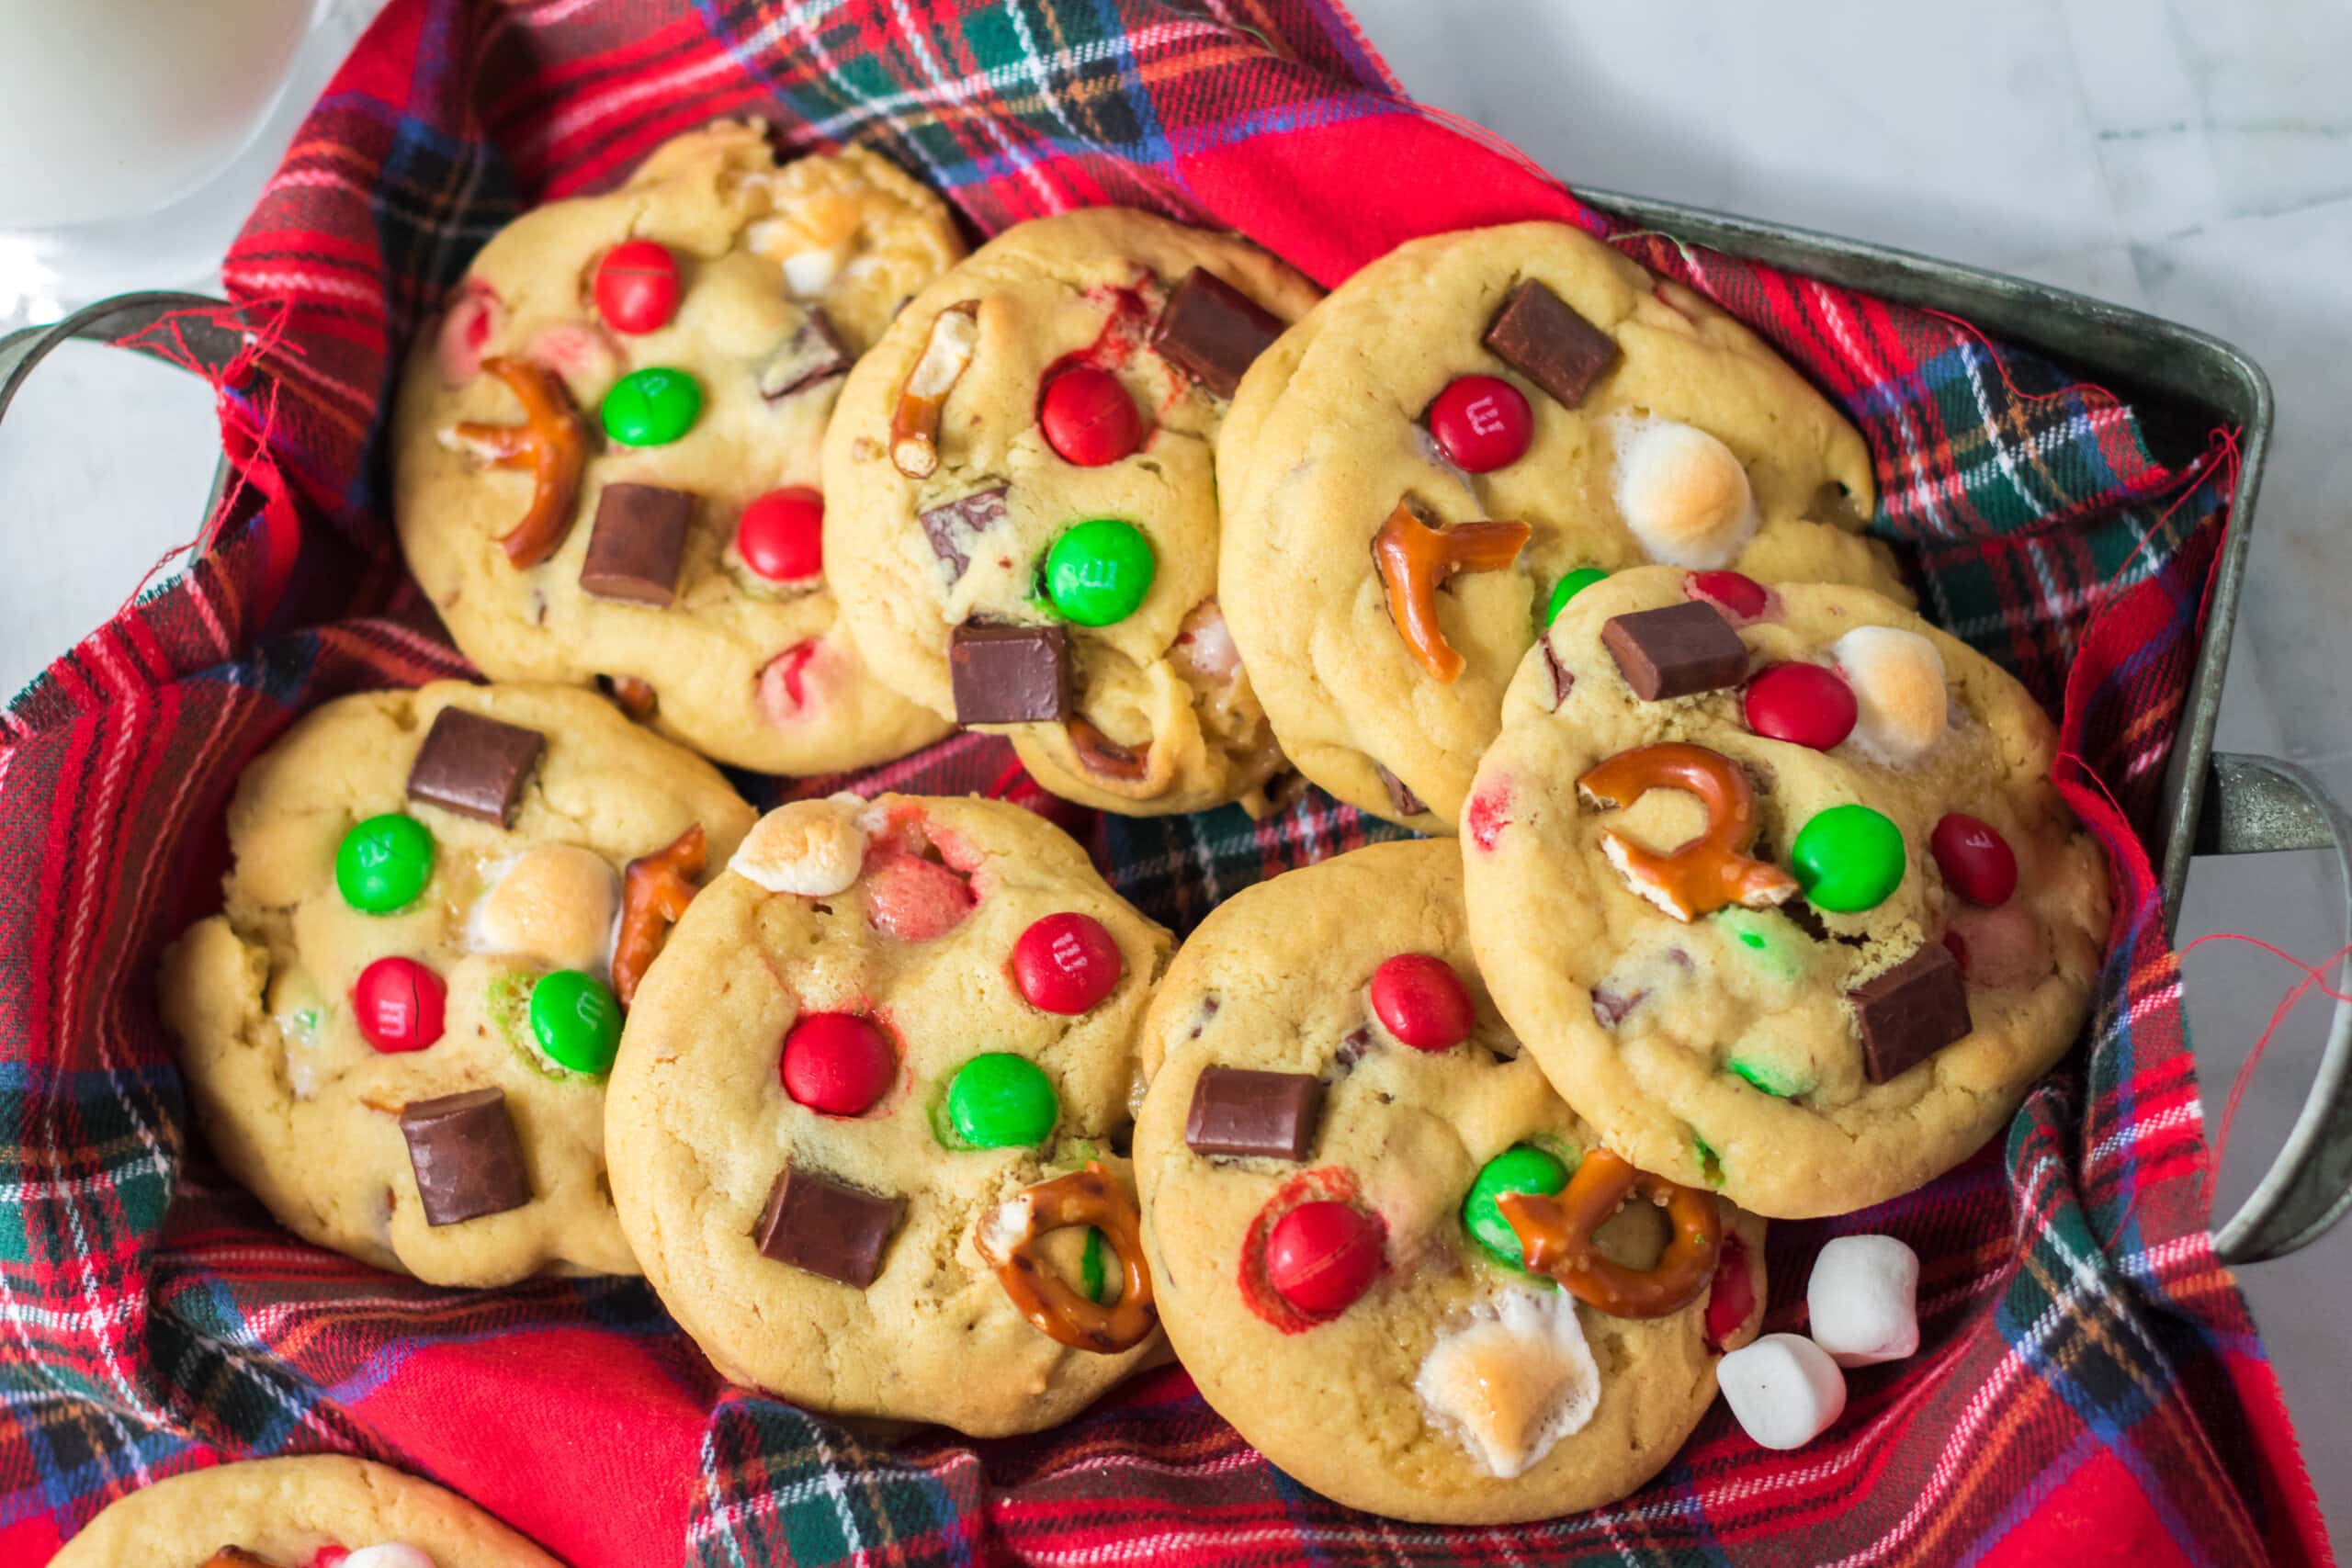 https://kitchenfunwithmy3sons.com/wp-content/uploads/2022/09/Christmas-Kitchen-Sink-Cookies-1-scaled.jpg